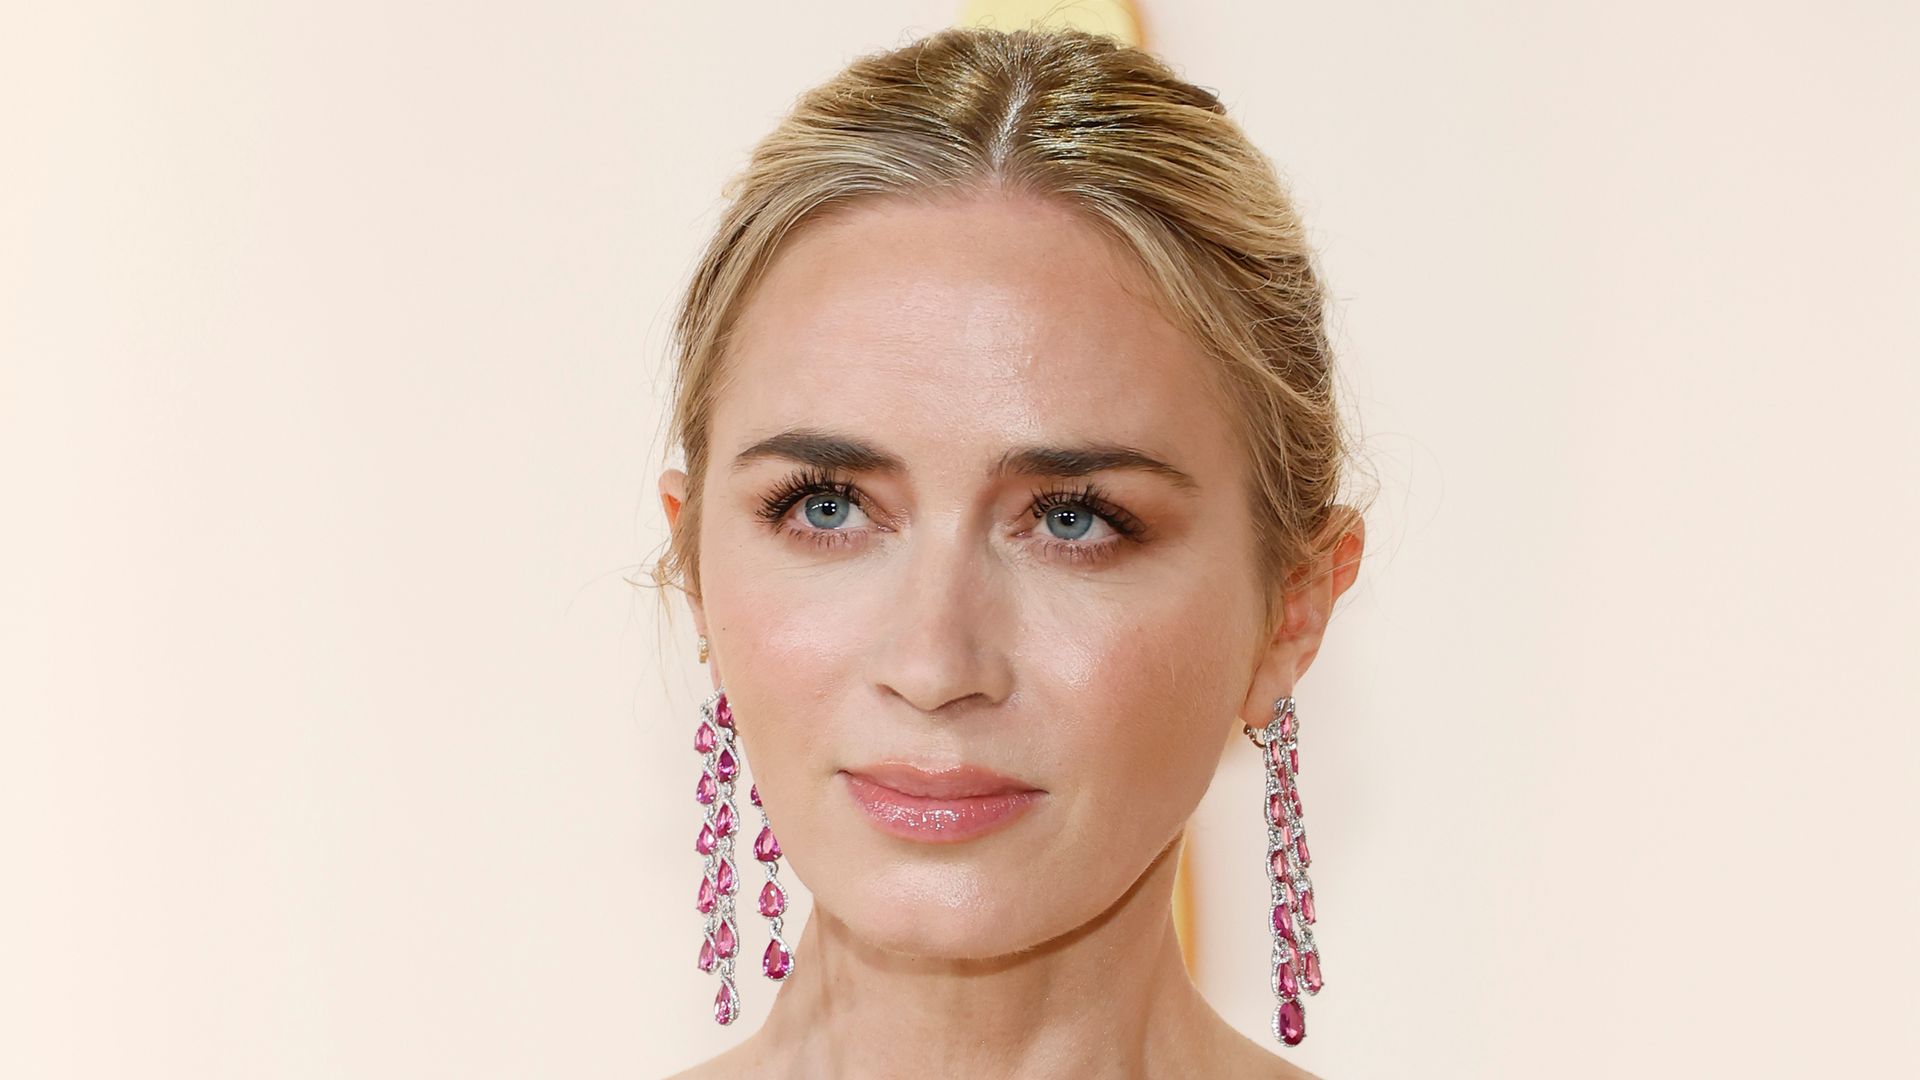 Emily Blunt attends the 95th Annual Academy Awards on March 12, 2023 in Hollywood, California. (Photo by Mike Coppola/Getty Images)